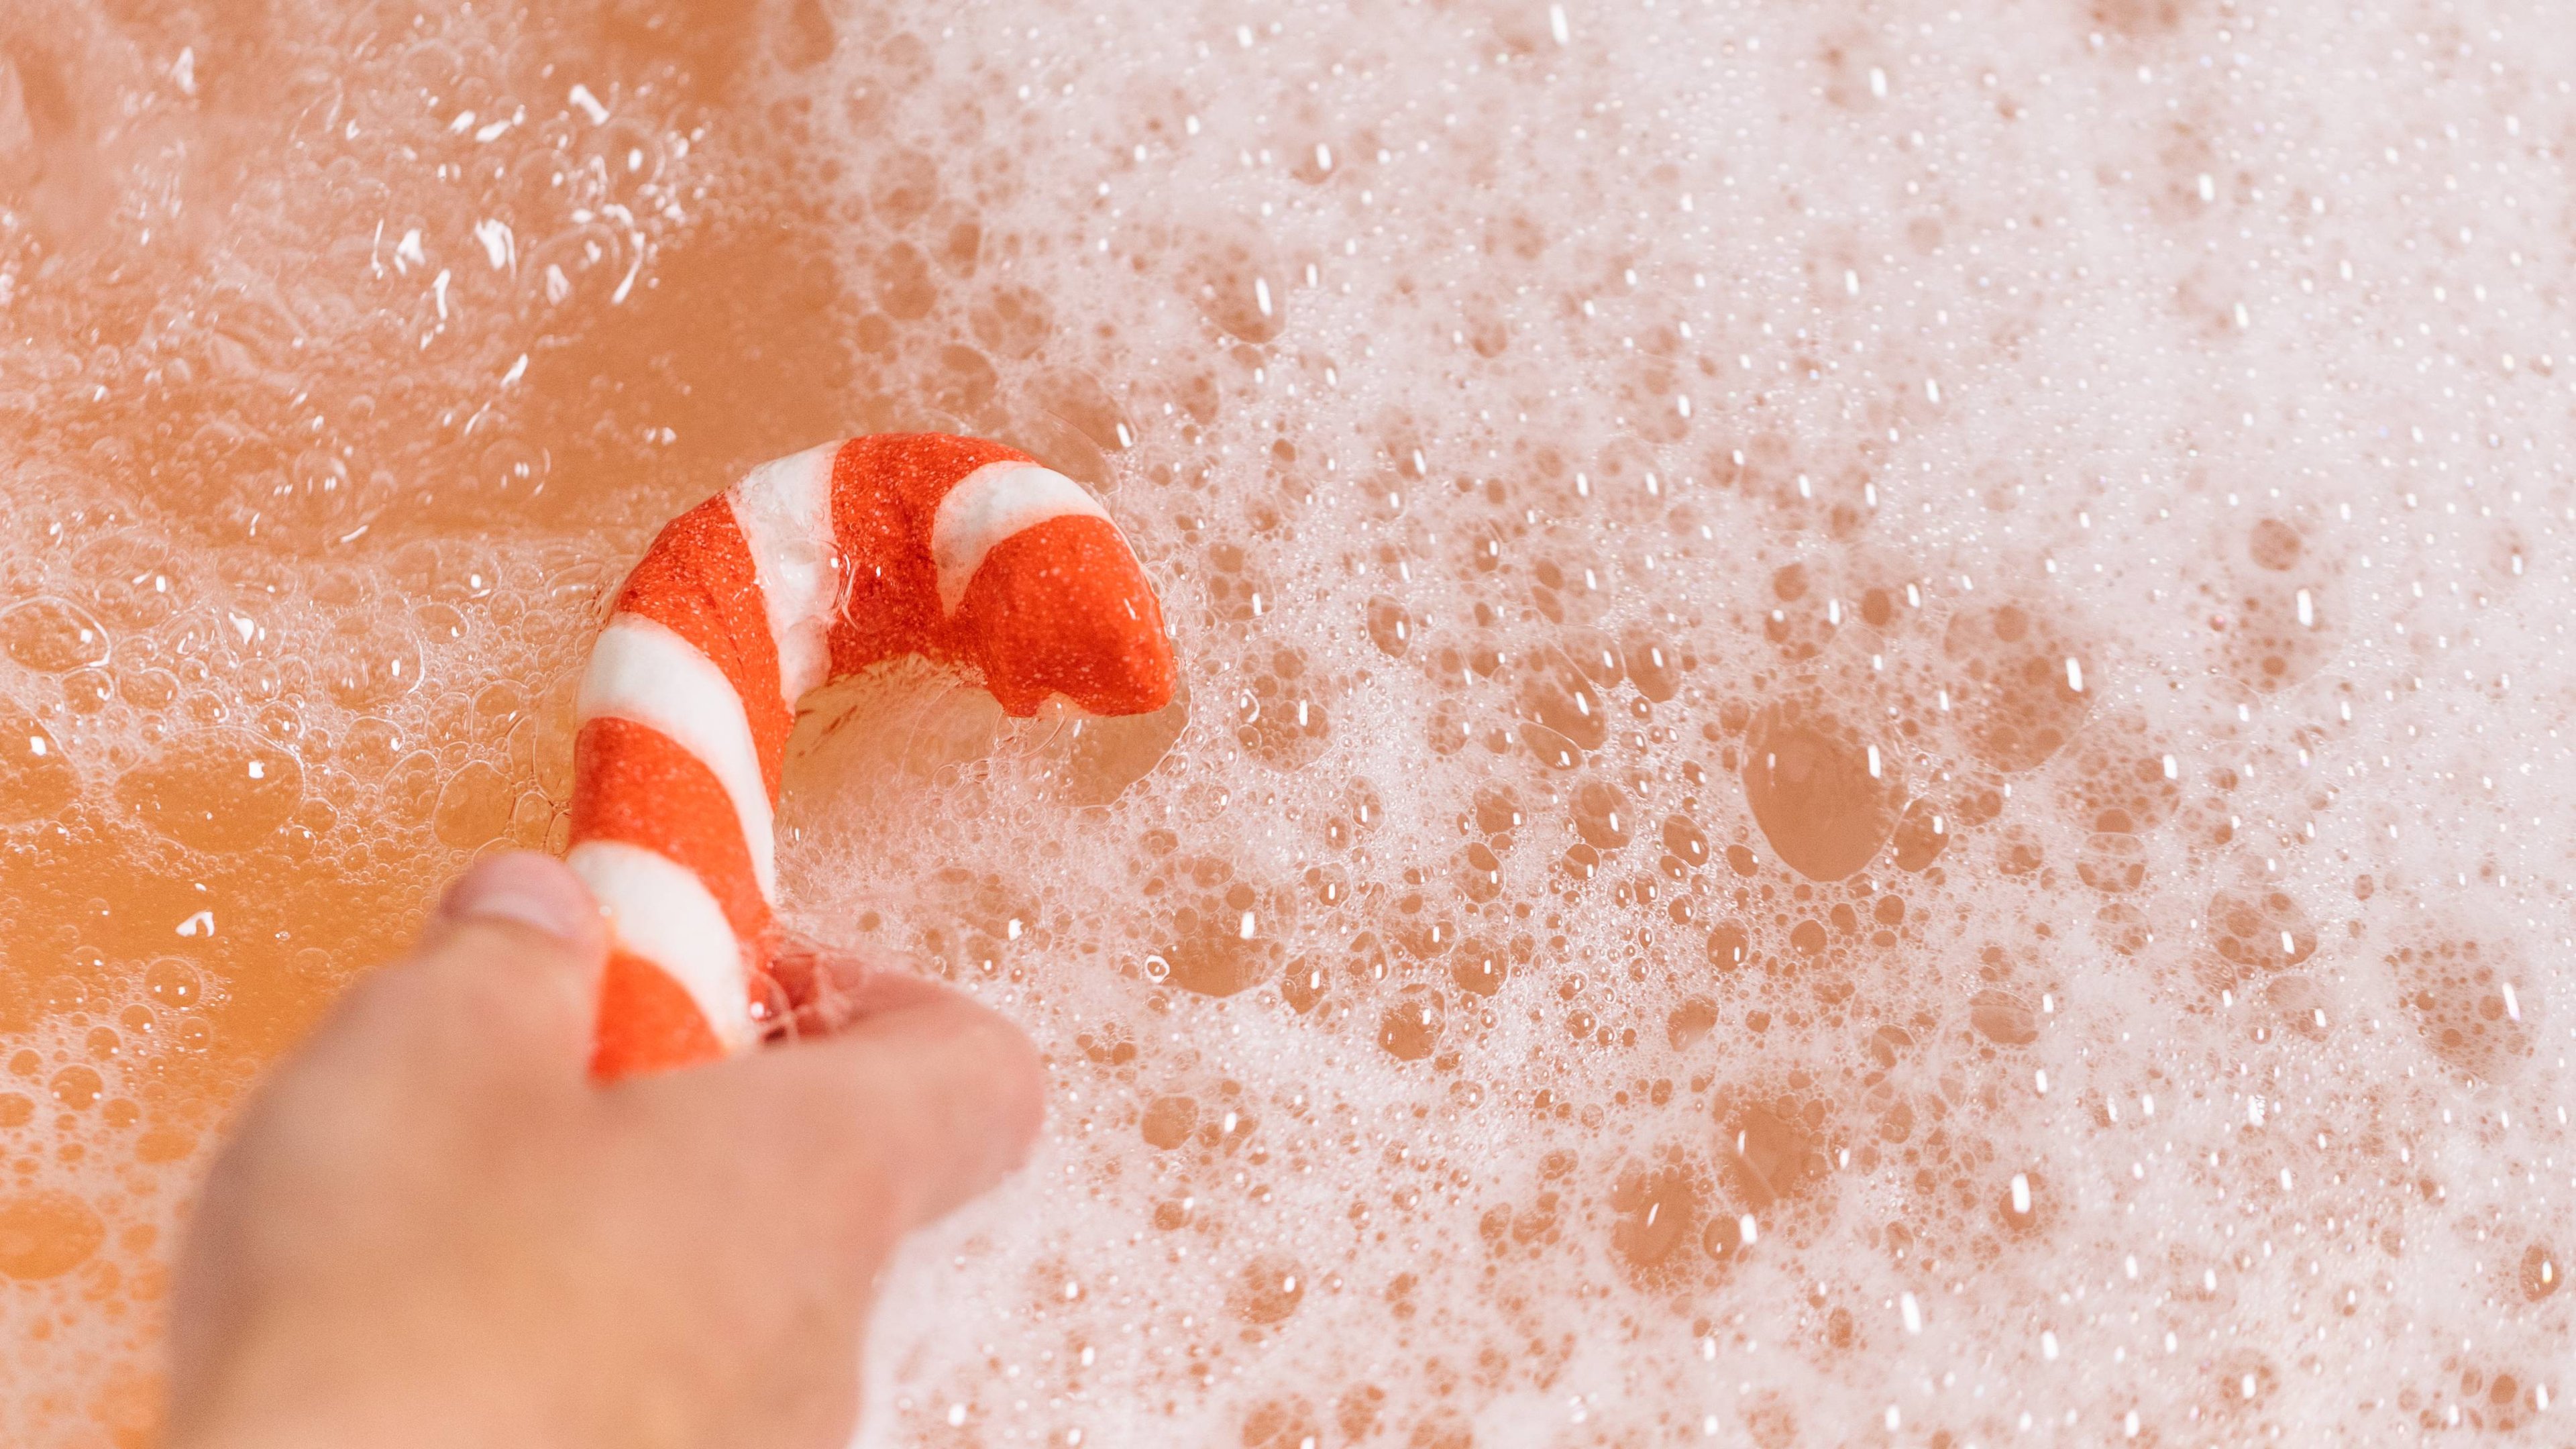 Image shows model holding the Candy Cane bubble bar in the bath water creating a calming bubble sea of orange.